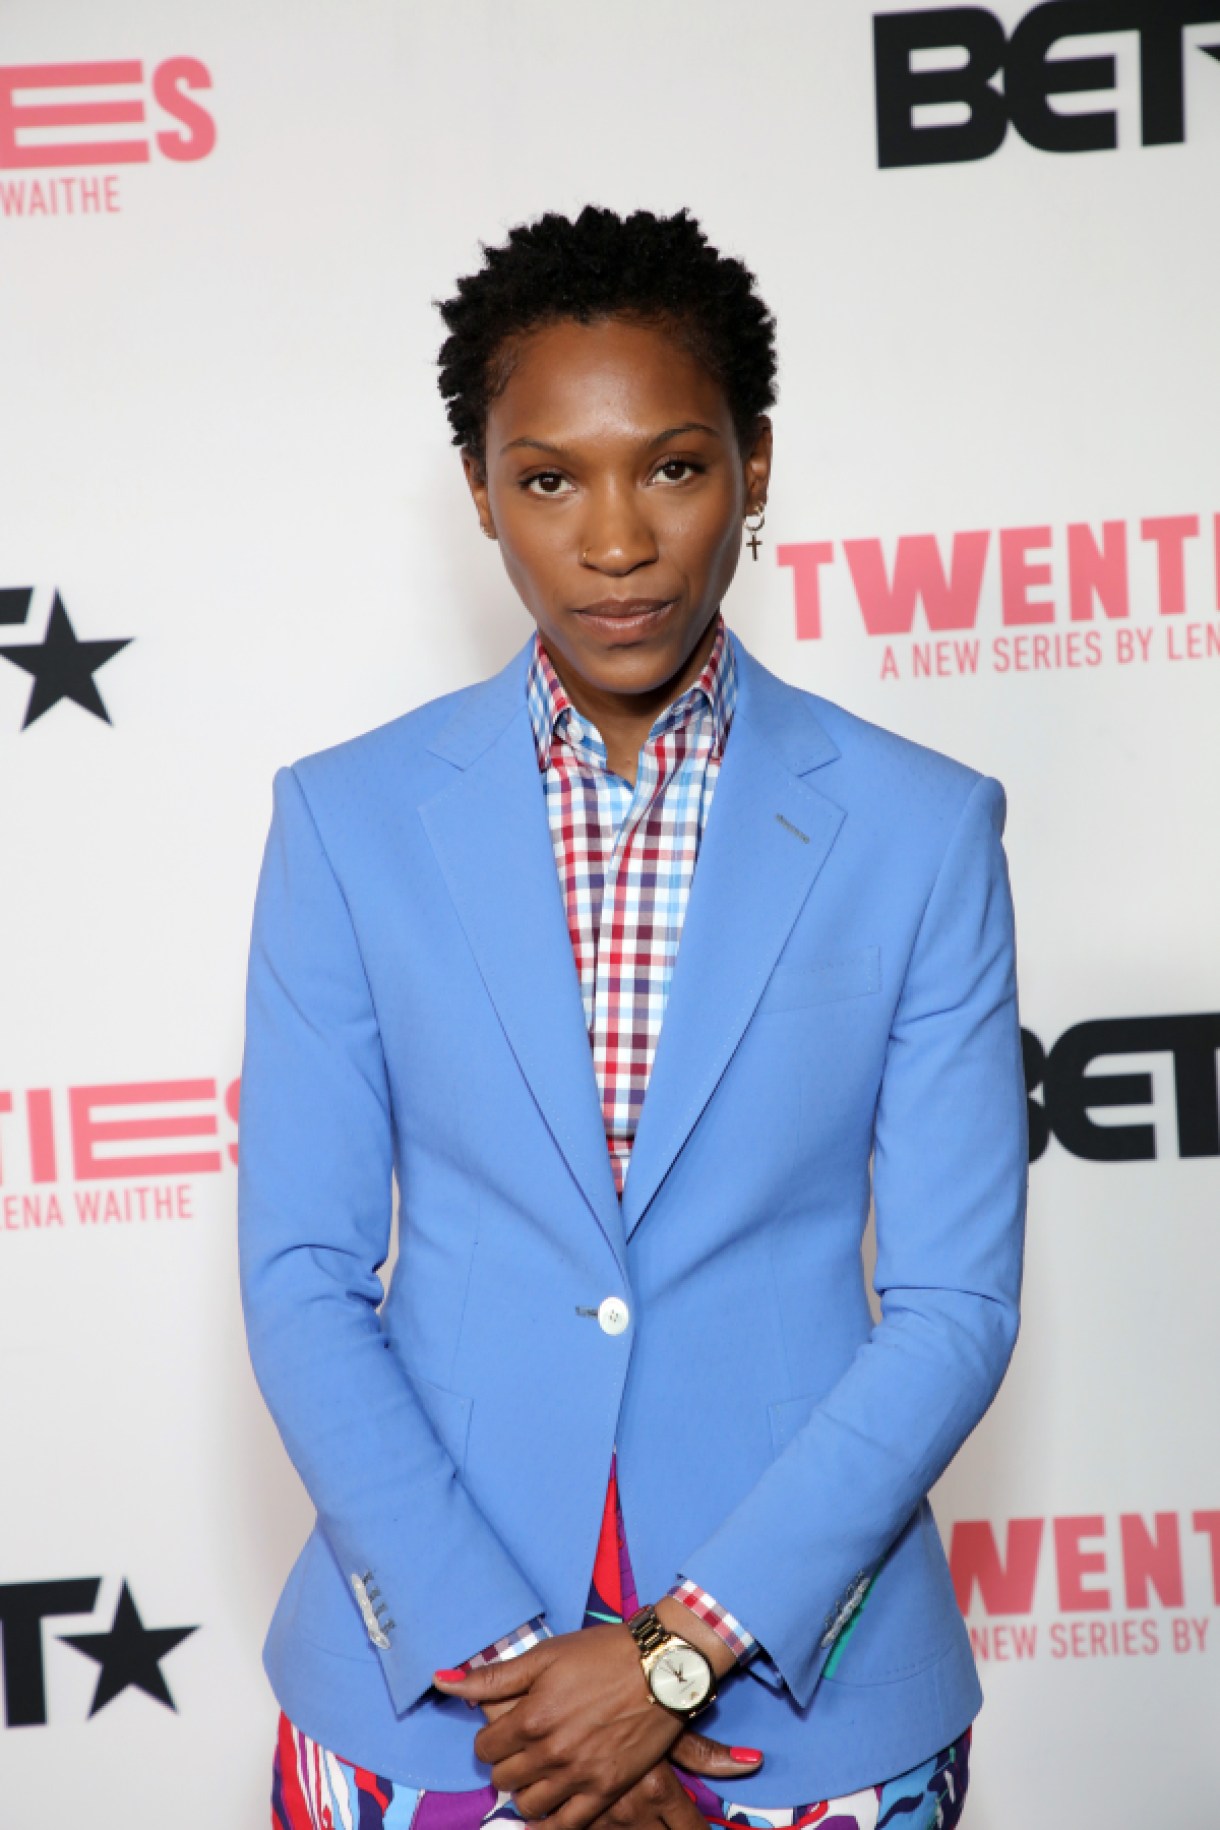 LOS ANGELES, CALIFORNIA - MARCH 02: Jonica "Jojo" T. Gibbs attends the premiere of BET's "Twenties" at Paramount Studios Stage 17 on March 02, 2020 in Los Angeles, California. (Photo by Robin L Marshall/Getty Images)